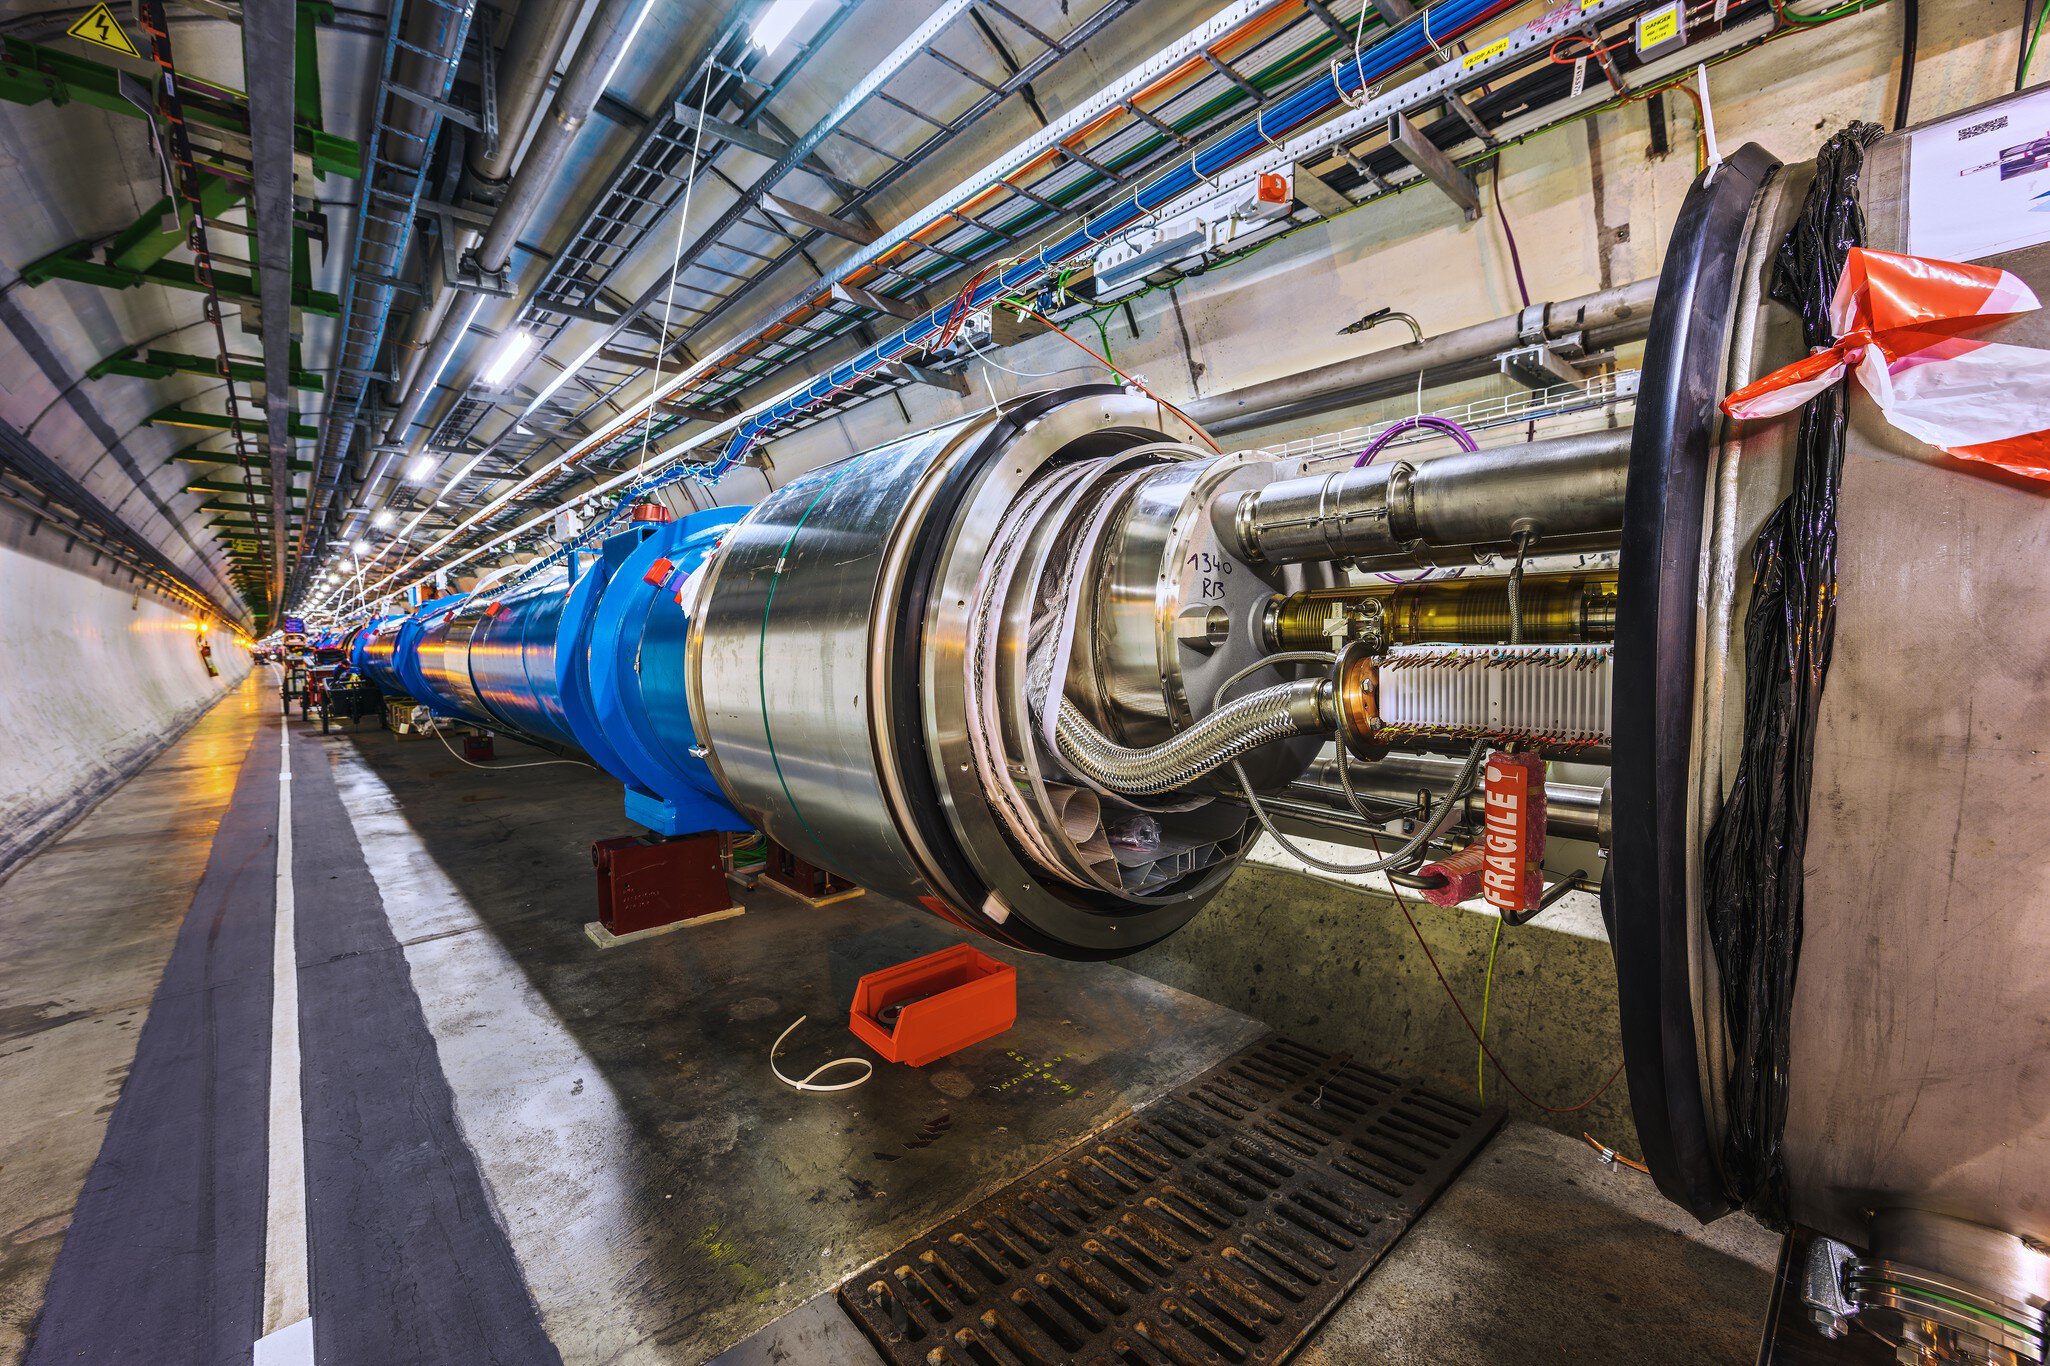 the large particle accelerator at CERN